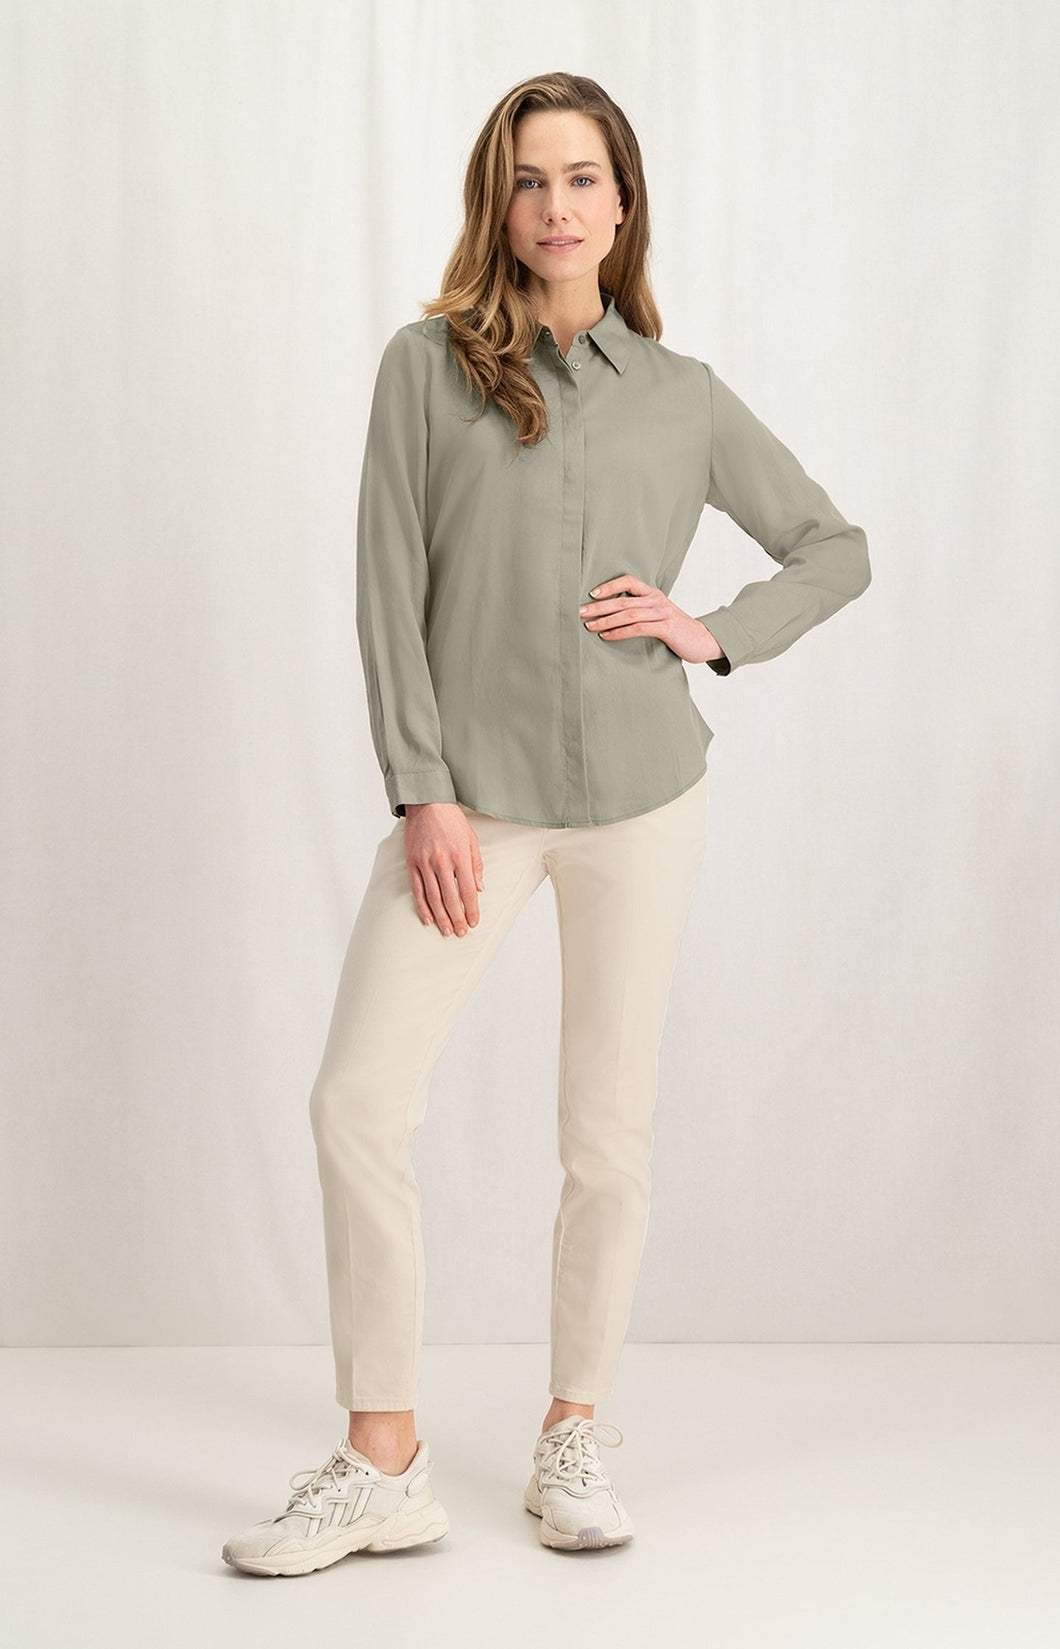 Soft poplin blouse with long sleeves, collar and buttons - Aluminium Beige - Type: closeup